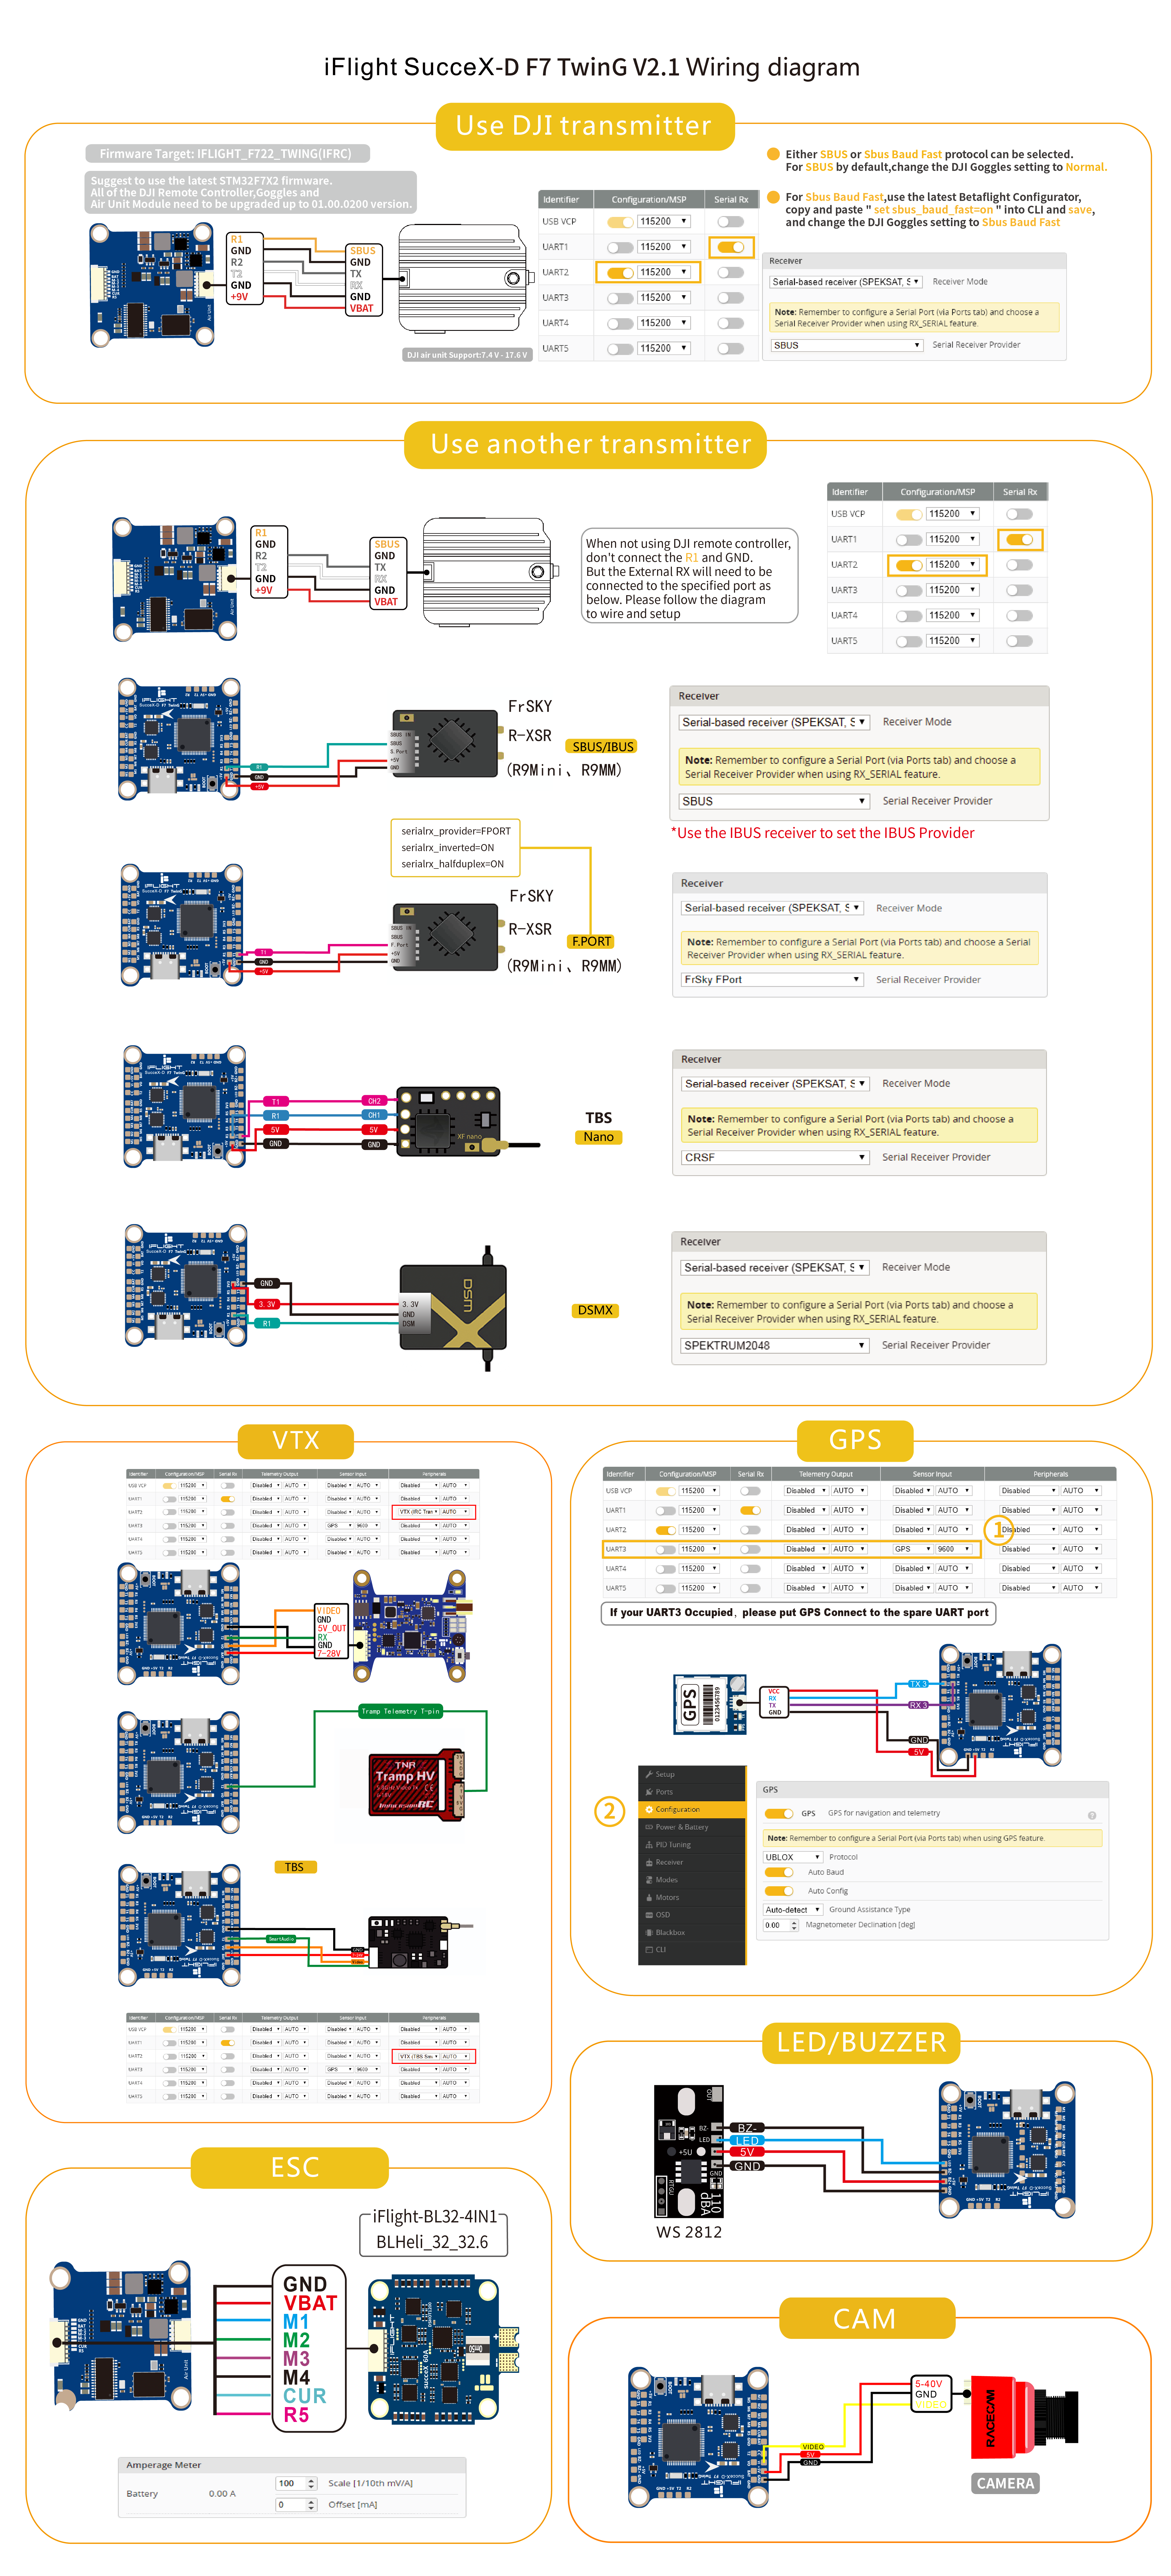 SUCCEX-D F7 TWING V2.1 wiring diagram-200604